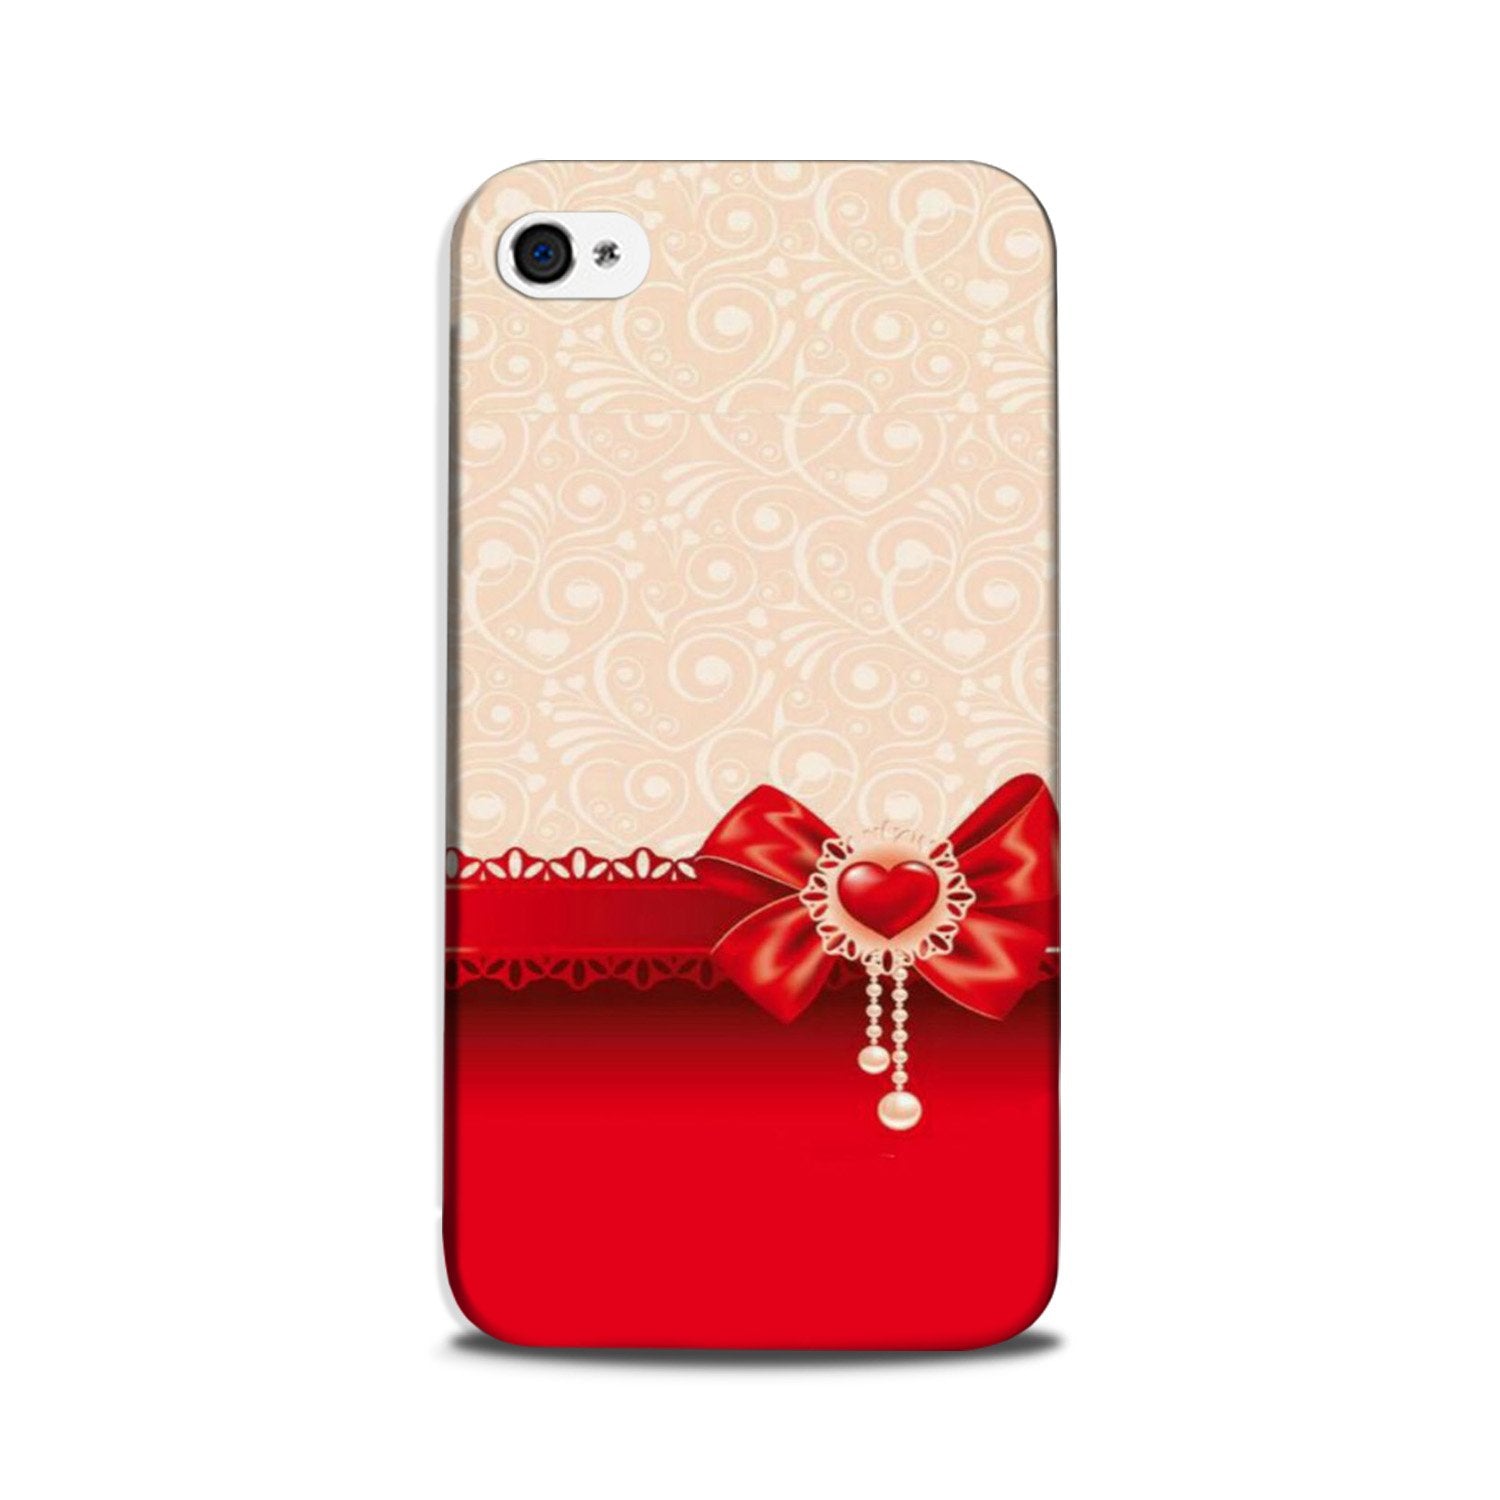 Gift Wrap3 Case for iPhone 5/ 5s